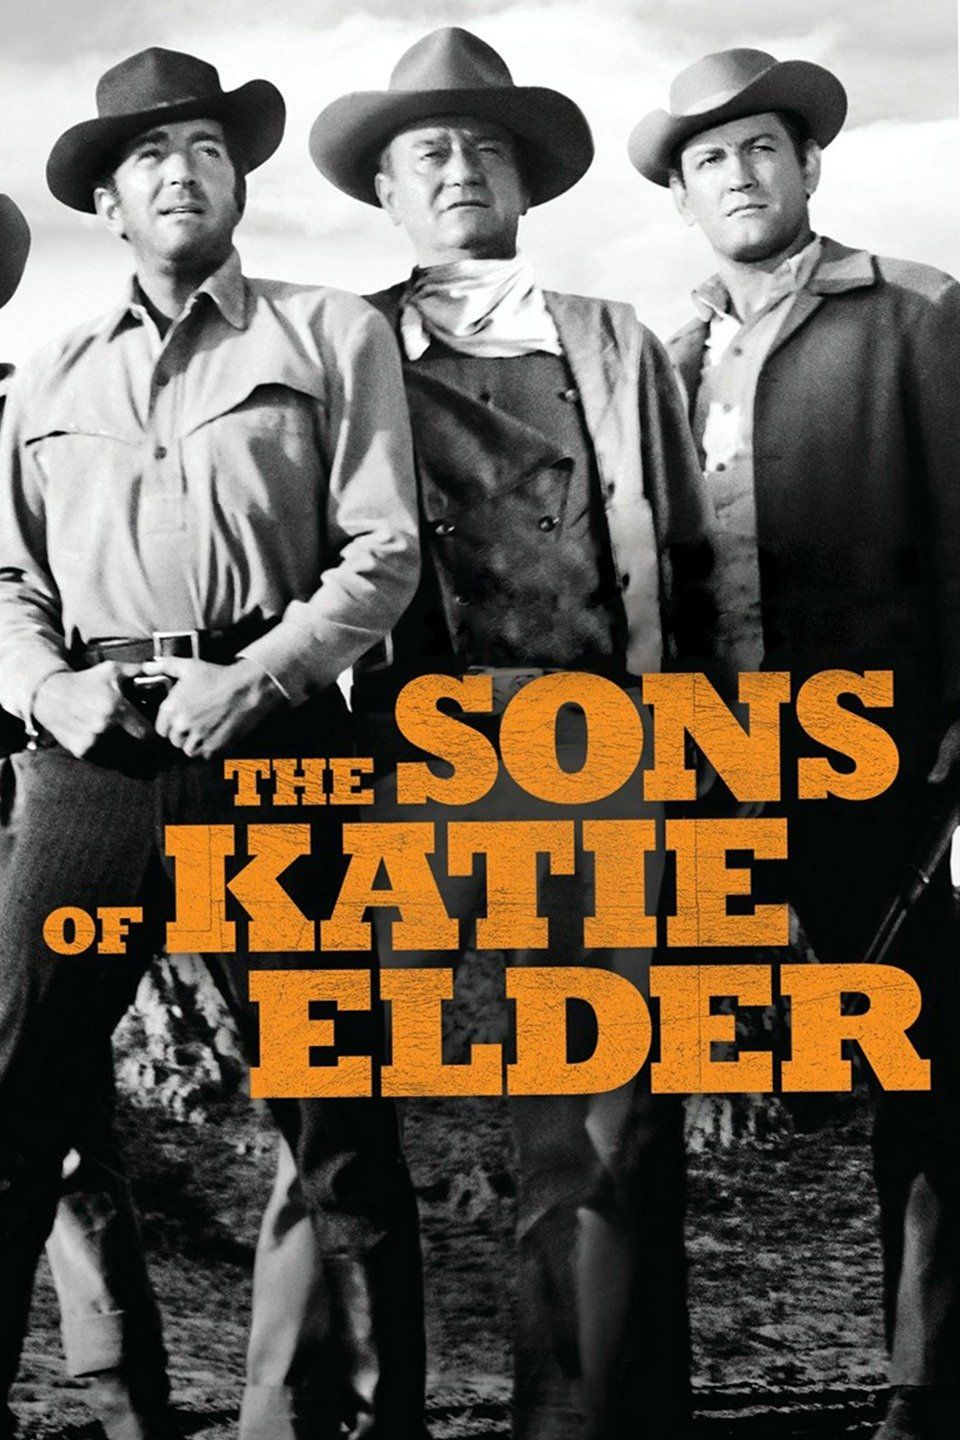 The Sons of Katie Elder film about Ouray County family